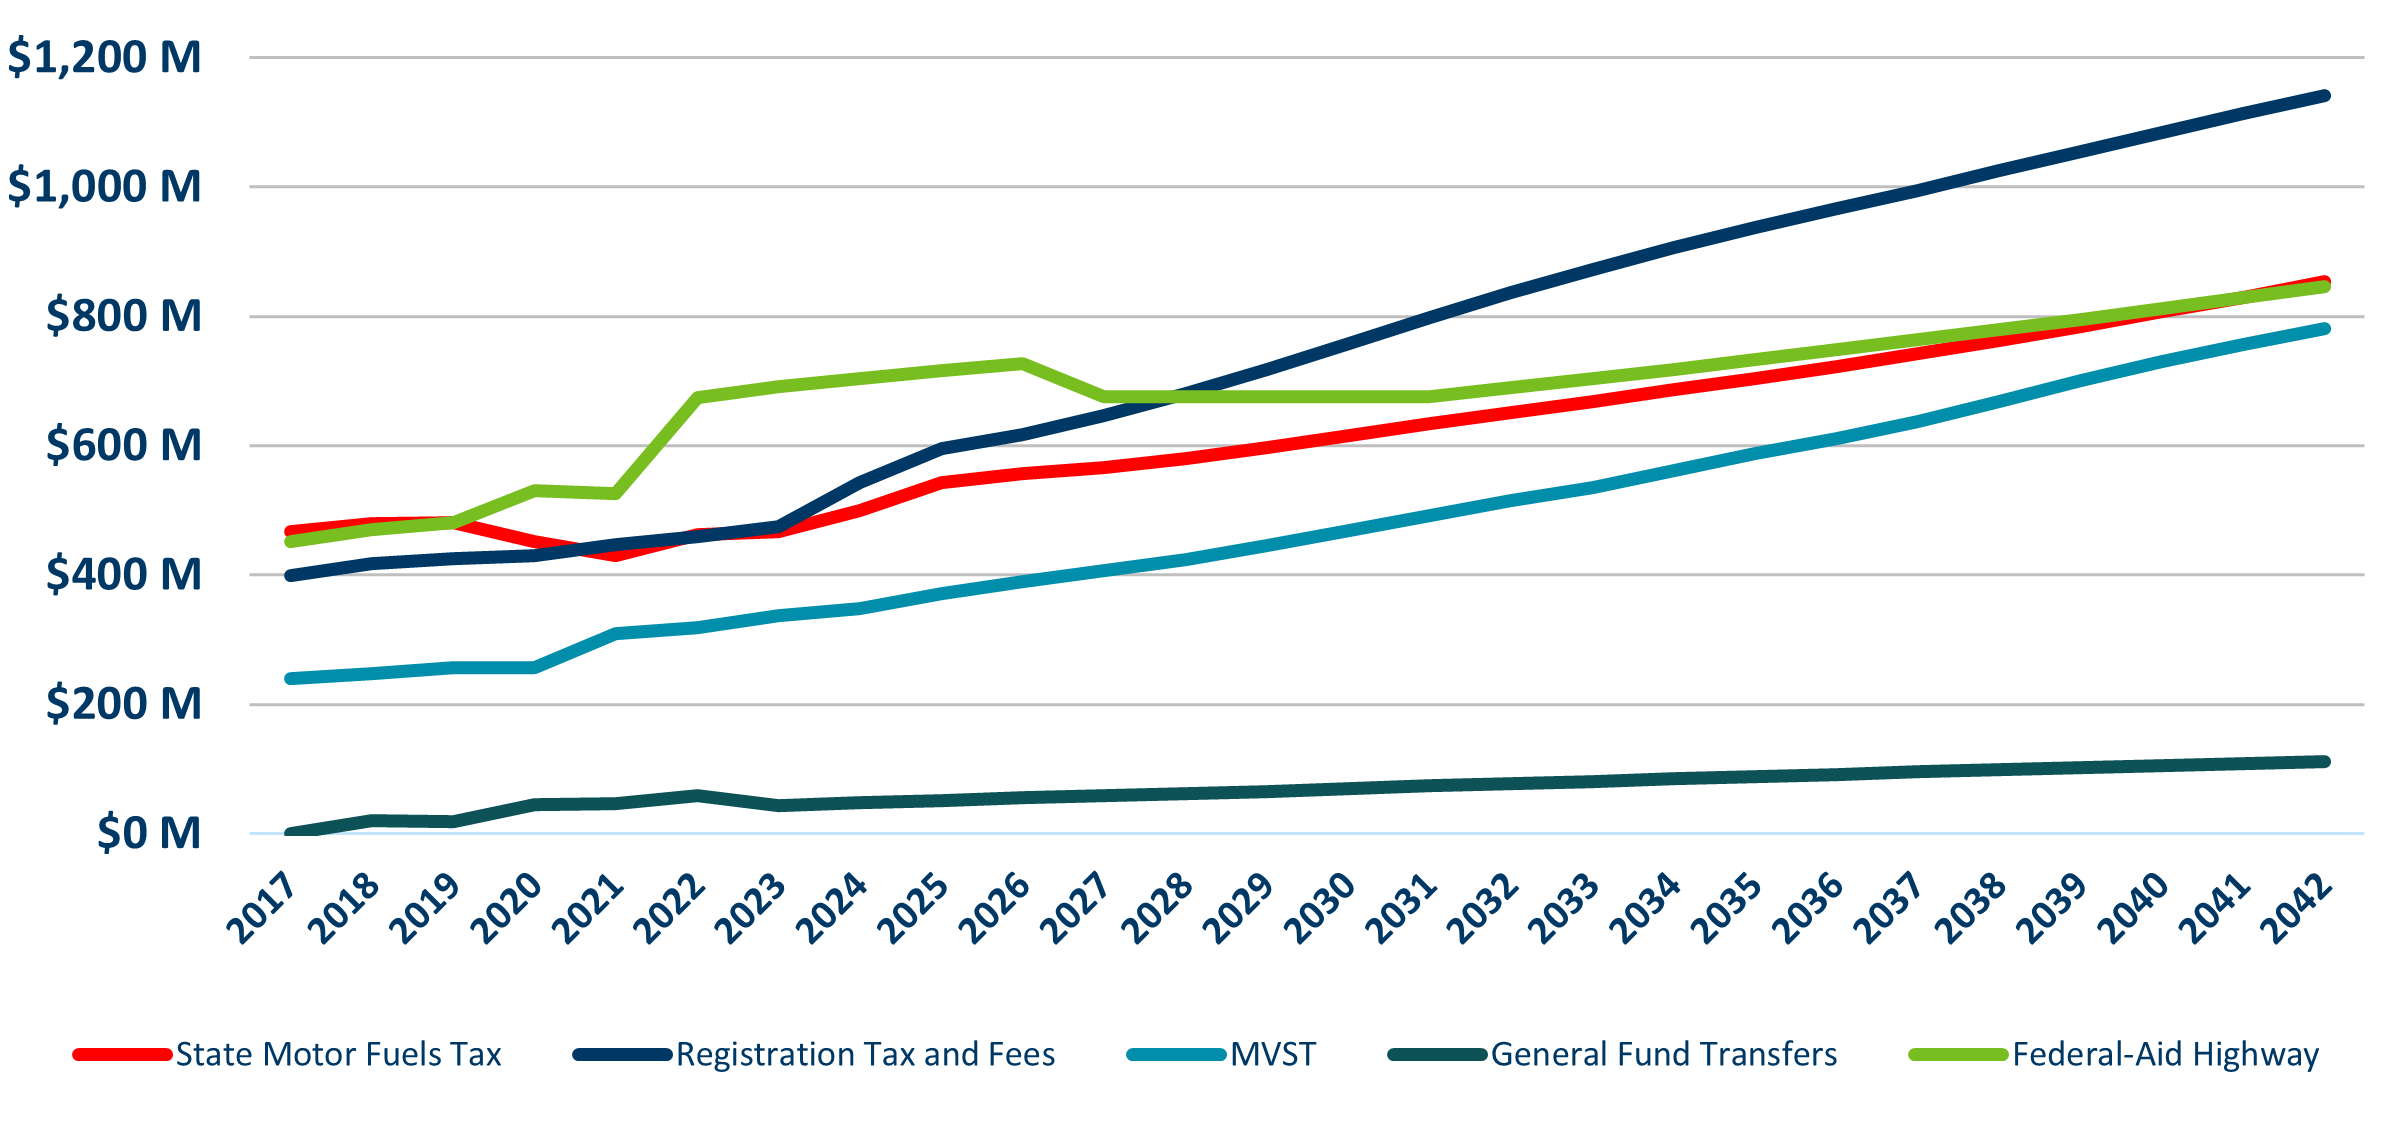 A Graph showing the Revenue trends from 2012-2042. Revenues are: State Motor Fuels Tax, Registration tax and Fees, MVST, General Fund Transfers, and Federal Highway Aid. 